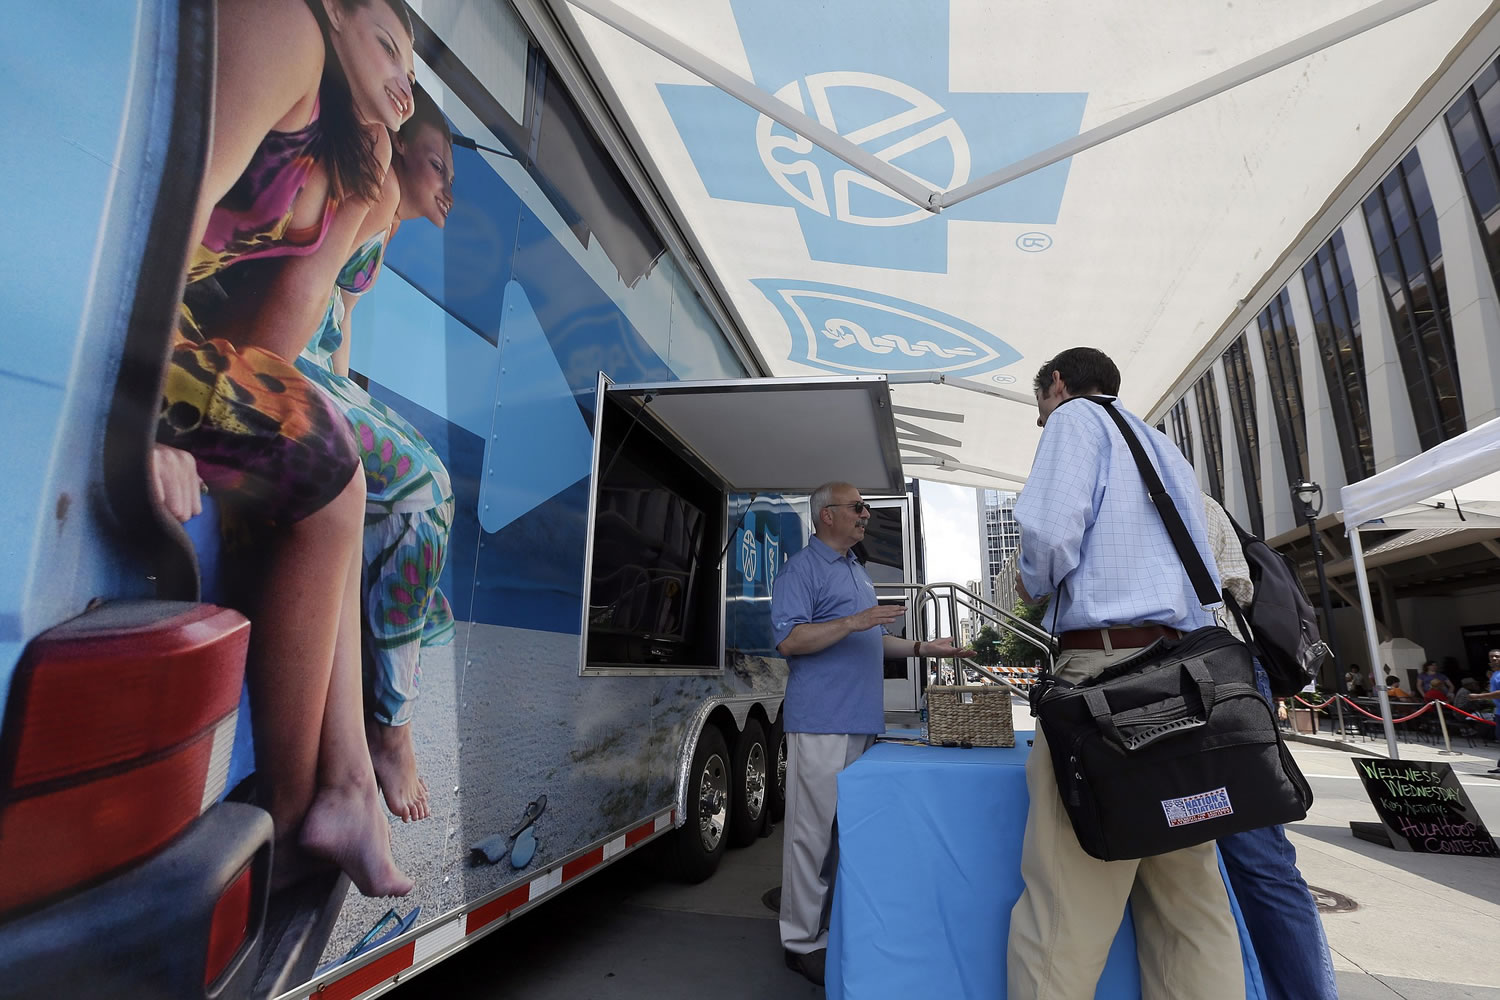 Blue Cross Blue Shield of North Carolina employee Lew Borman, left, helps a customer outside a trailer at the downtown farmer's market in Raleigh, N.C.